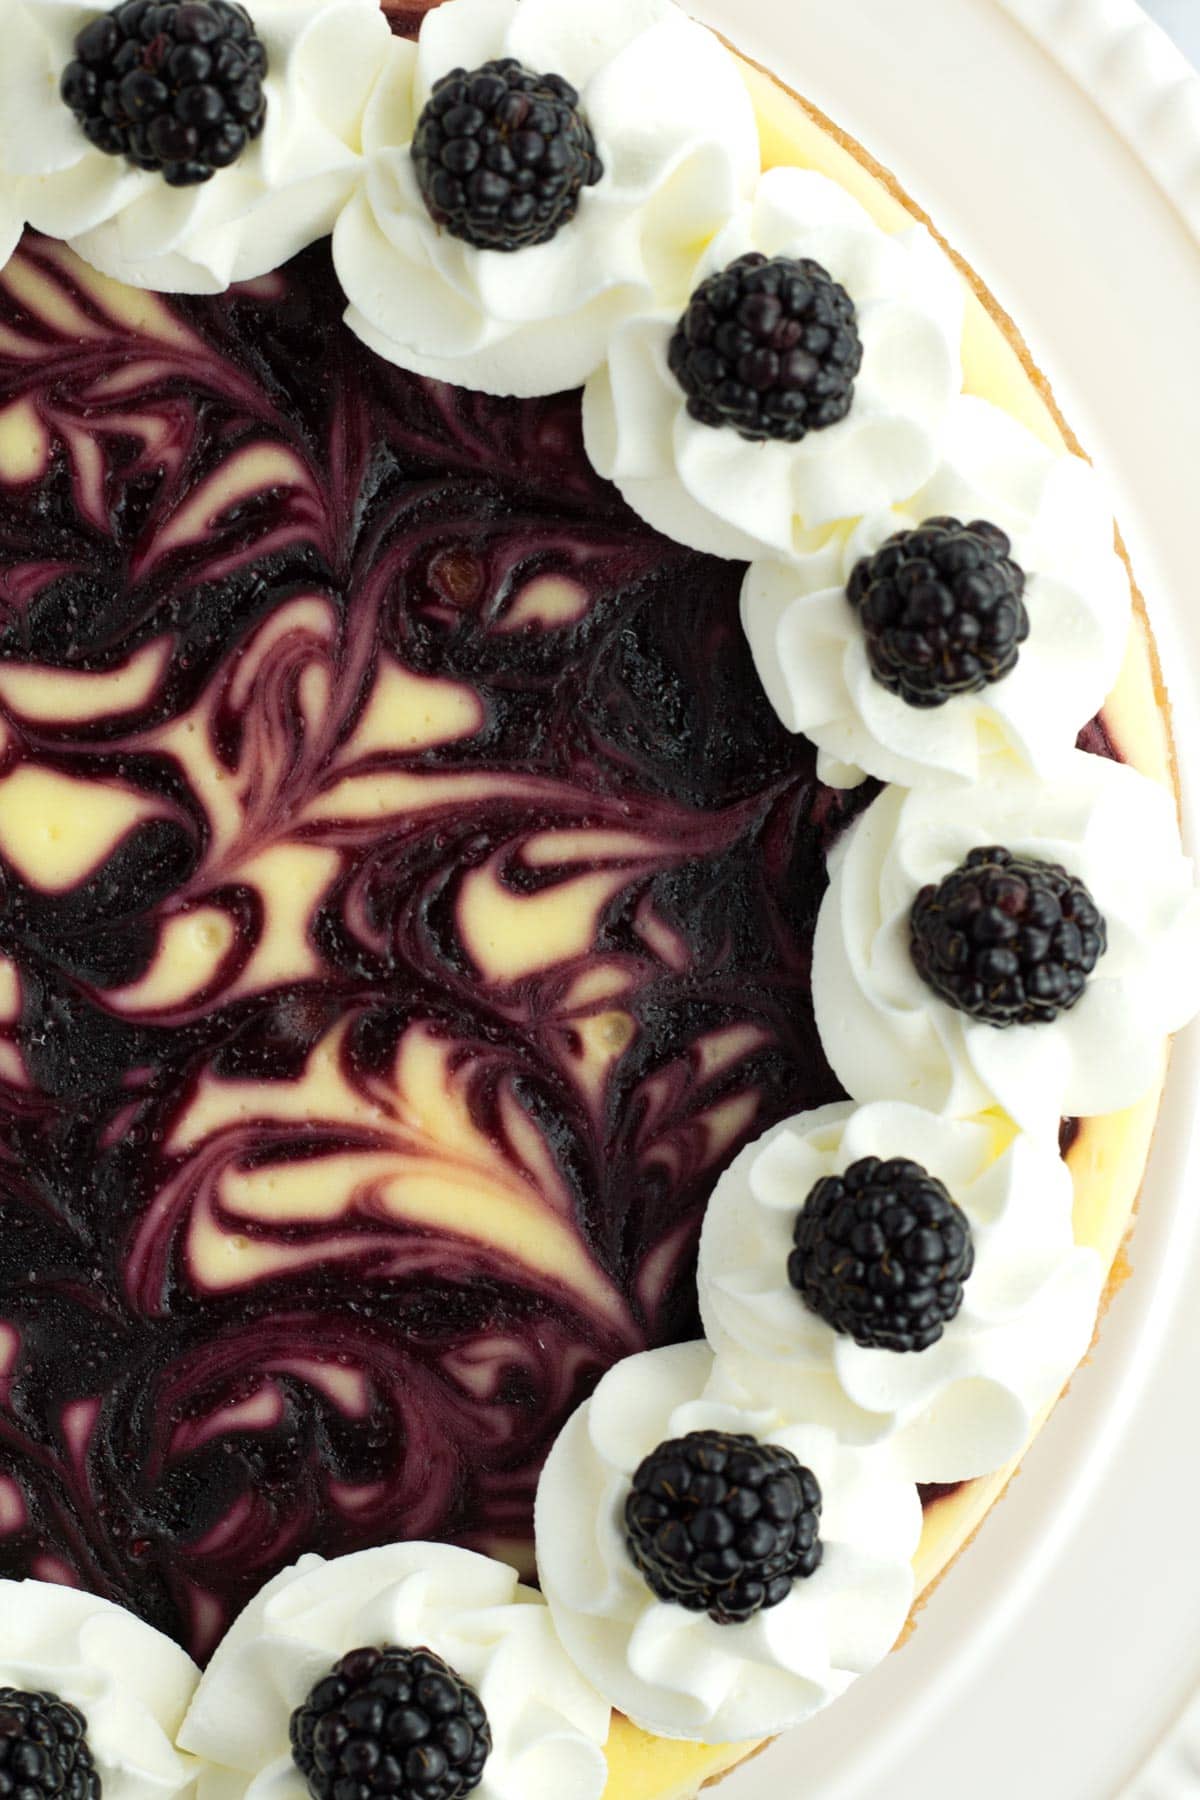 Overhead view of swirled blackberry cheesecake with whipped cream on edges.